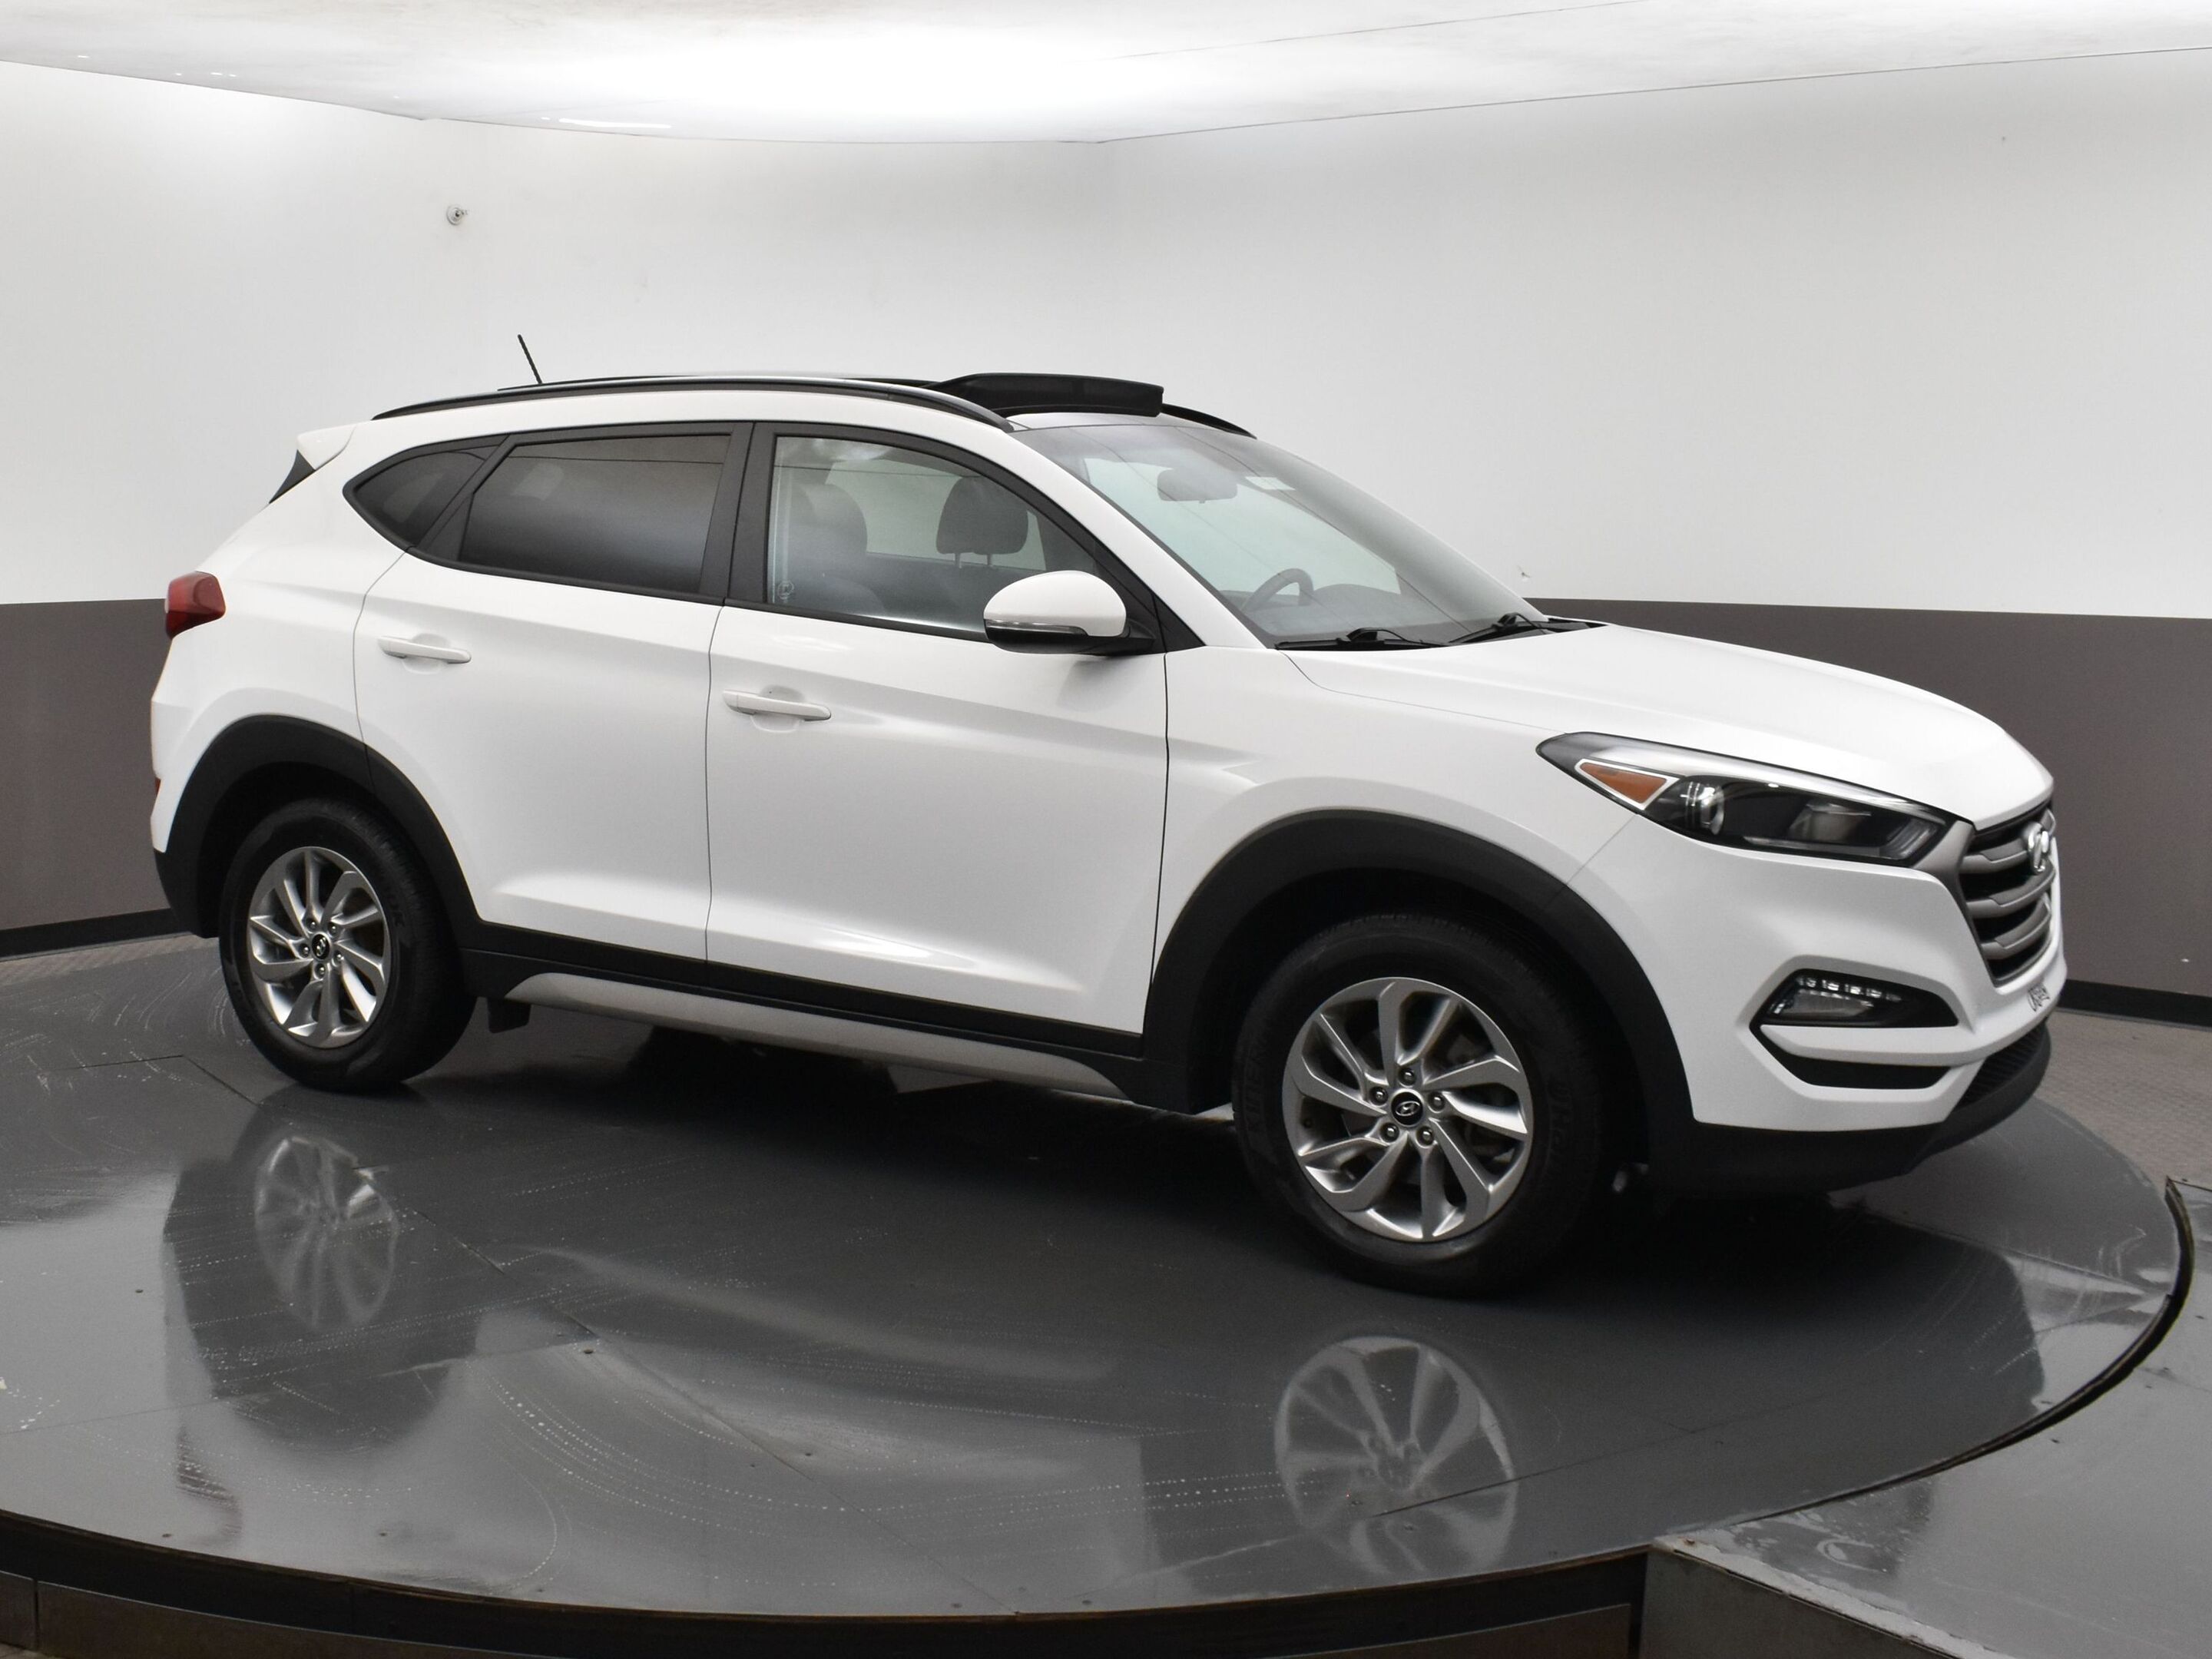 2017 Hyundai Tucson One Owner GLS SE FWD !!! Leather, Panoramic Roof, 